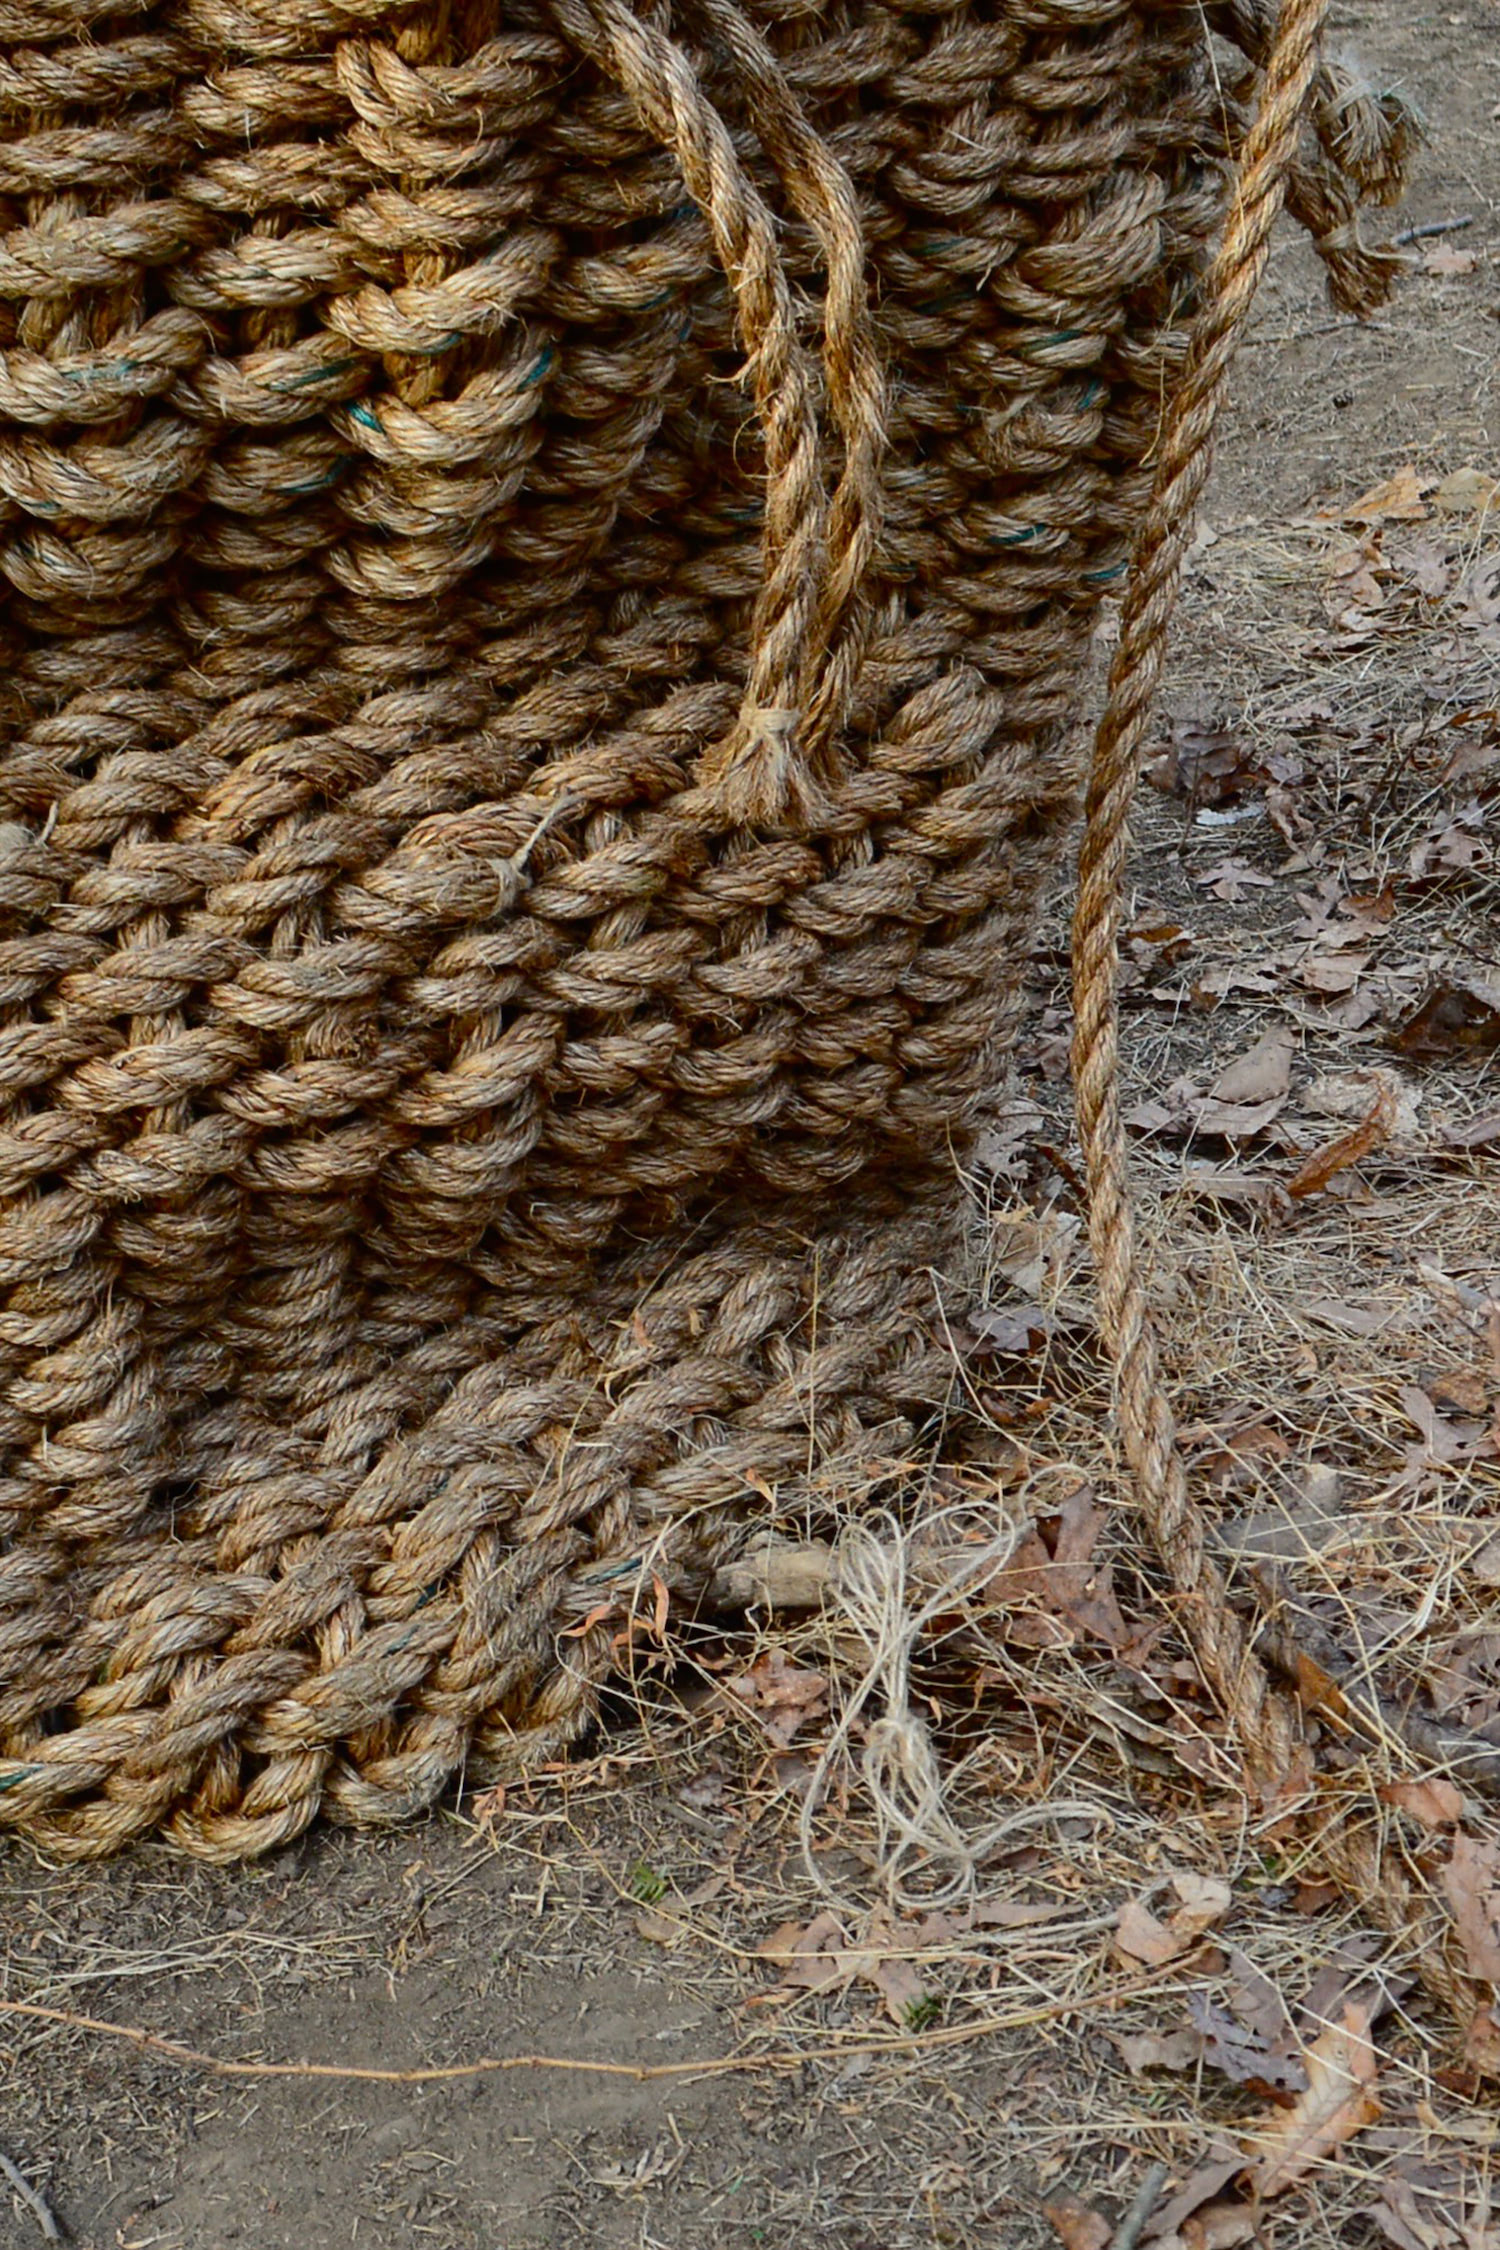 The base, which folds in on itself several times due to the weight of the basket, is situated on the left hand side of the photograph. Some of the hanging rope used as weavers, or horizontal weaving material, is tied with jute twine to ensure the edges do not fray. The sculpture is grounding itself, pulling the surrounding dead grasses and leaves toward its base. A harmonious relationship exists between the muted yellow and brown tones of the basket and the surrounding environment.